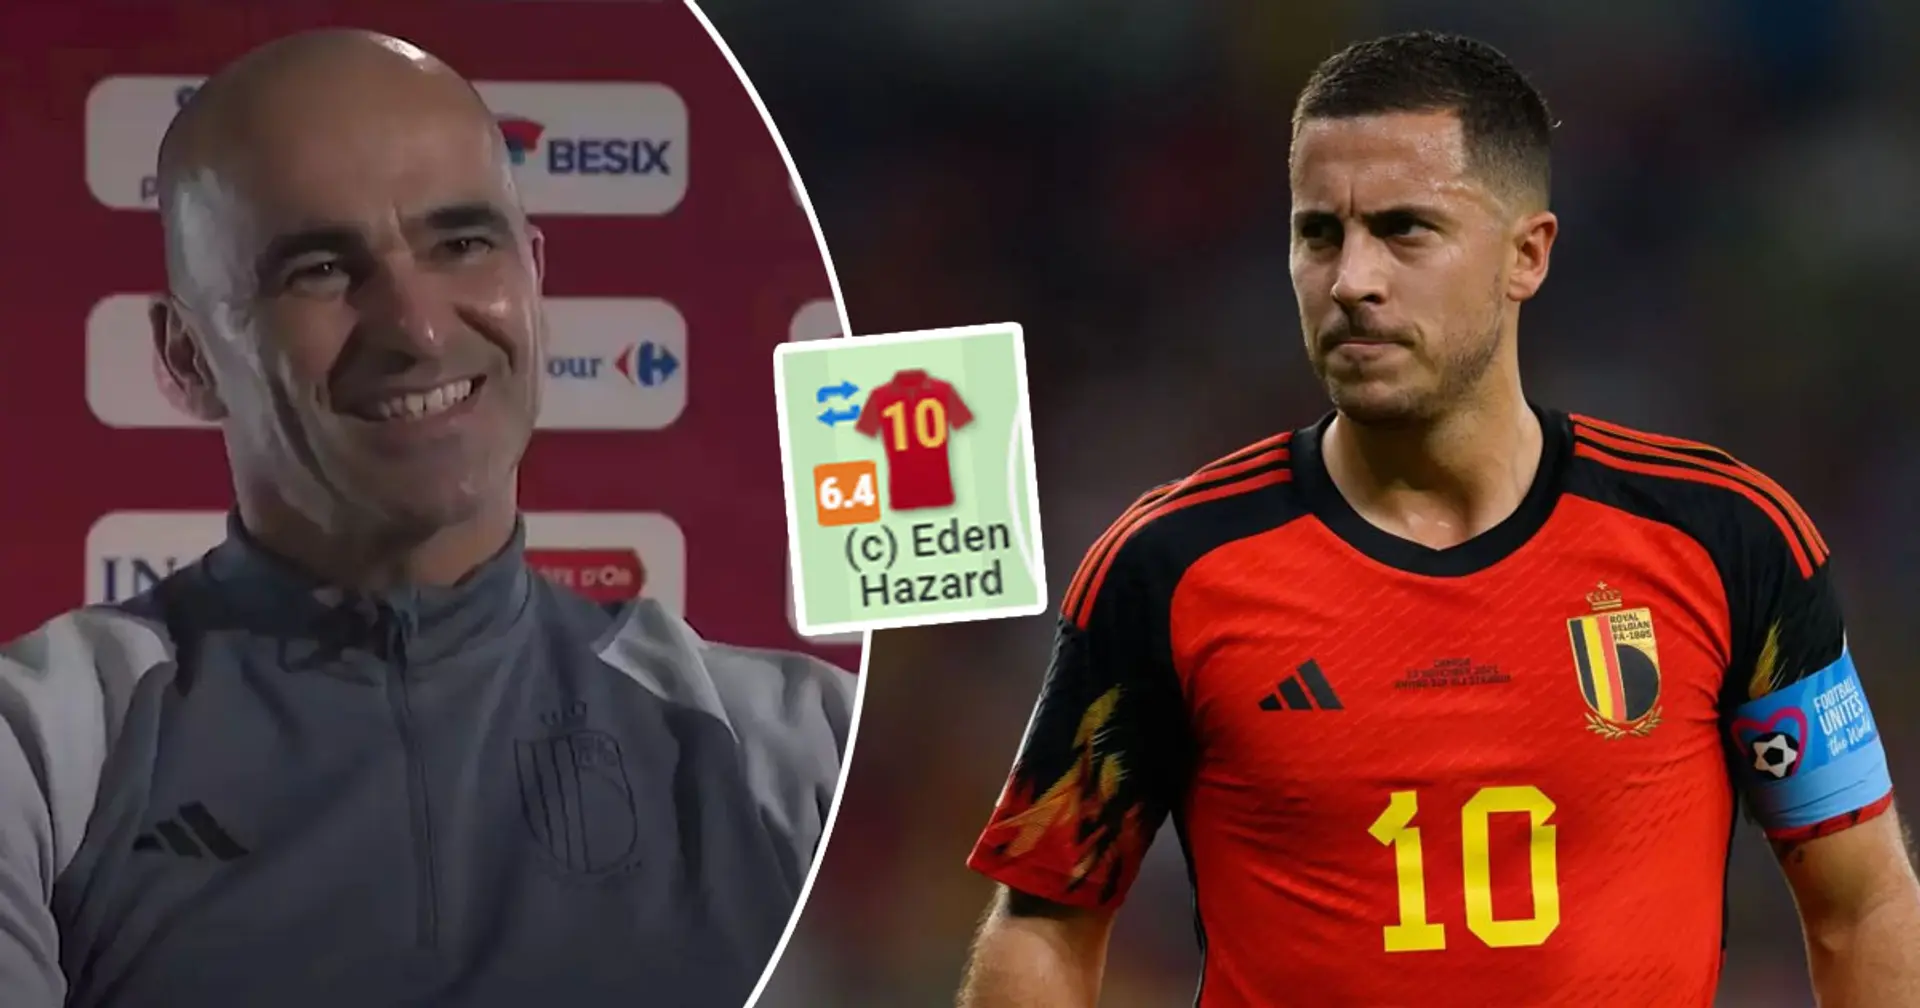 Belgium coach praises Hazard over 'great' game v Morocco - stats suggest he was nothing special